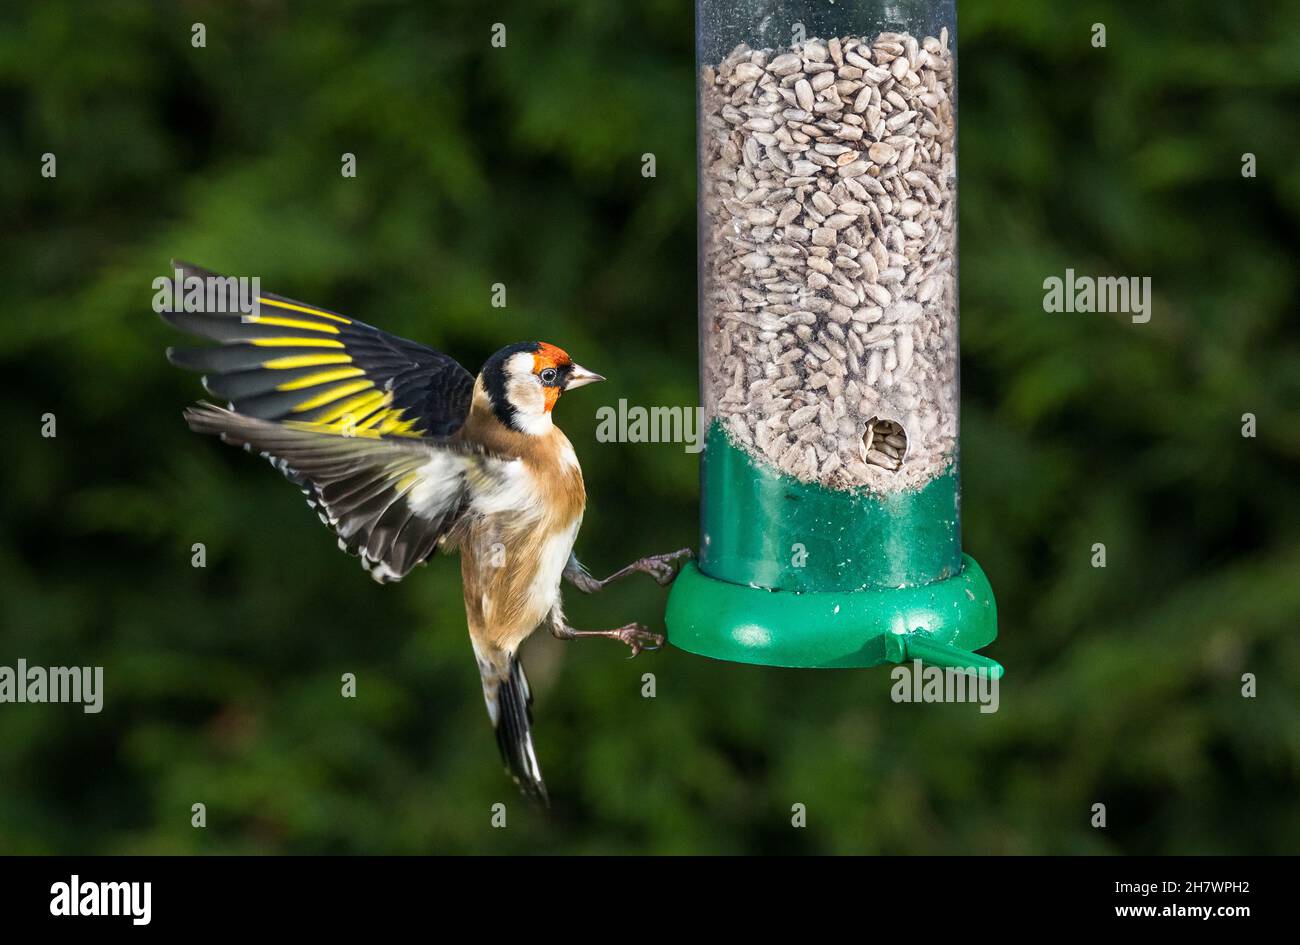 Carrigaline, Cork, Ireland. 25th November, 2021. On a cold frosty morning a Goldfinch is about to land on a feeder in a garden in Carrigaline, Co. Cork, Ireland. - Credit; David Creedon / Alamy Live News Stock Photo